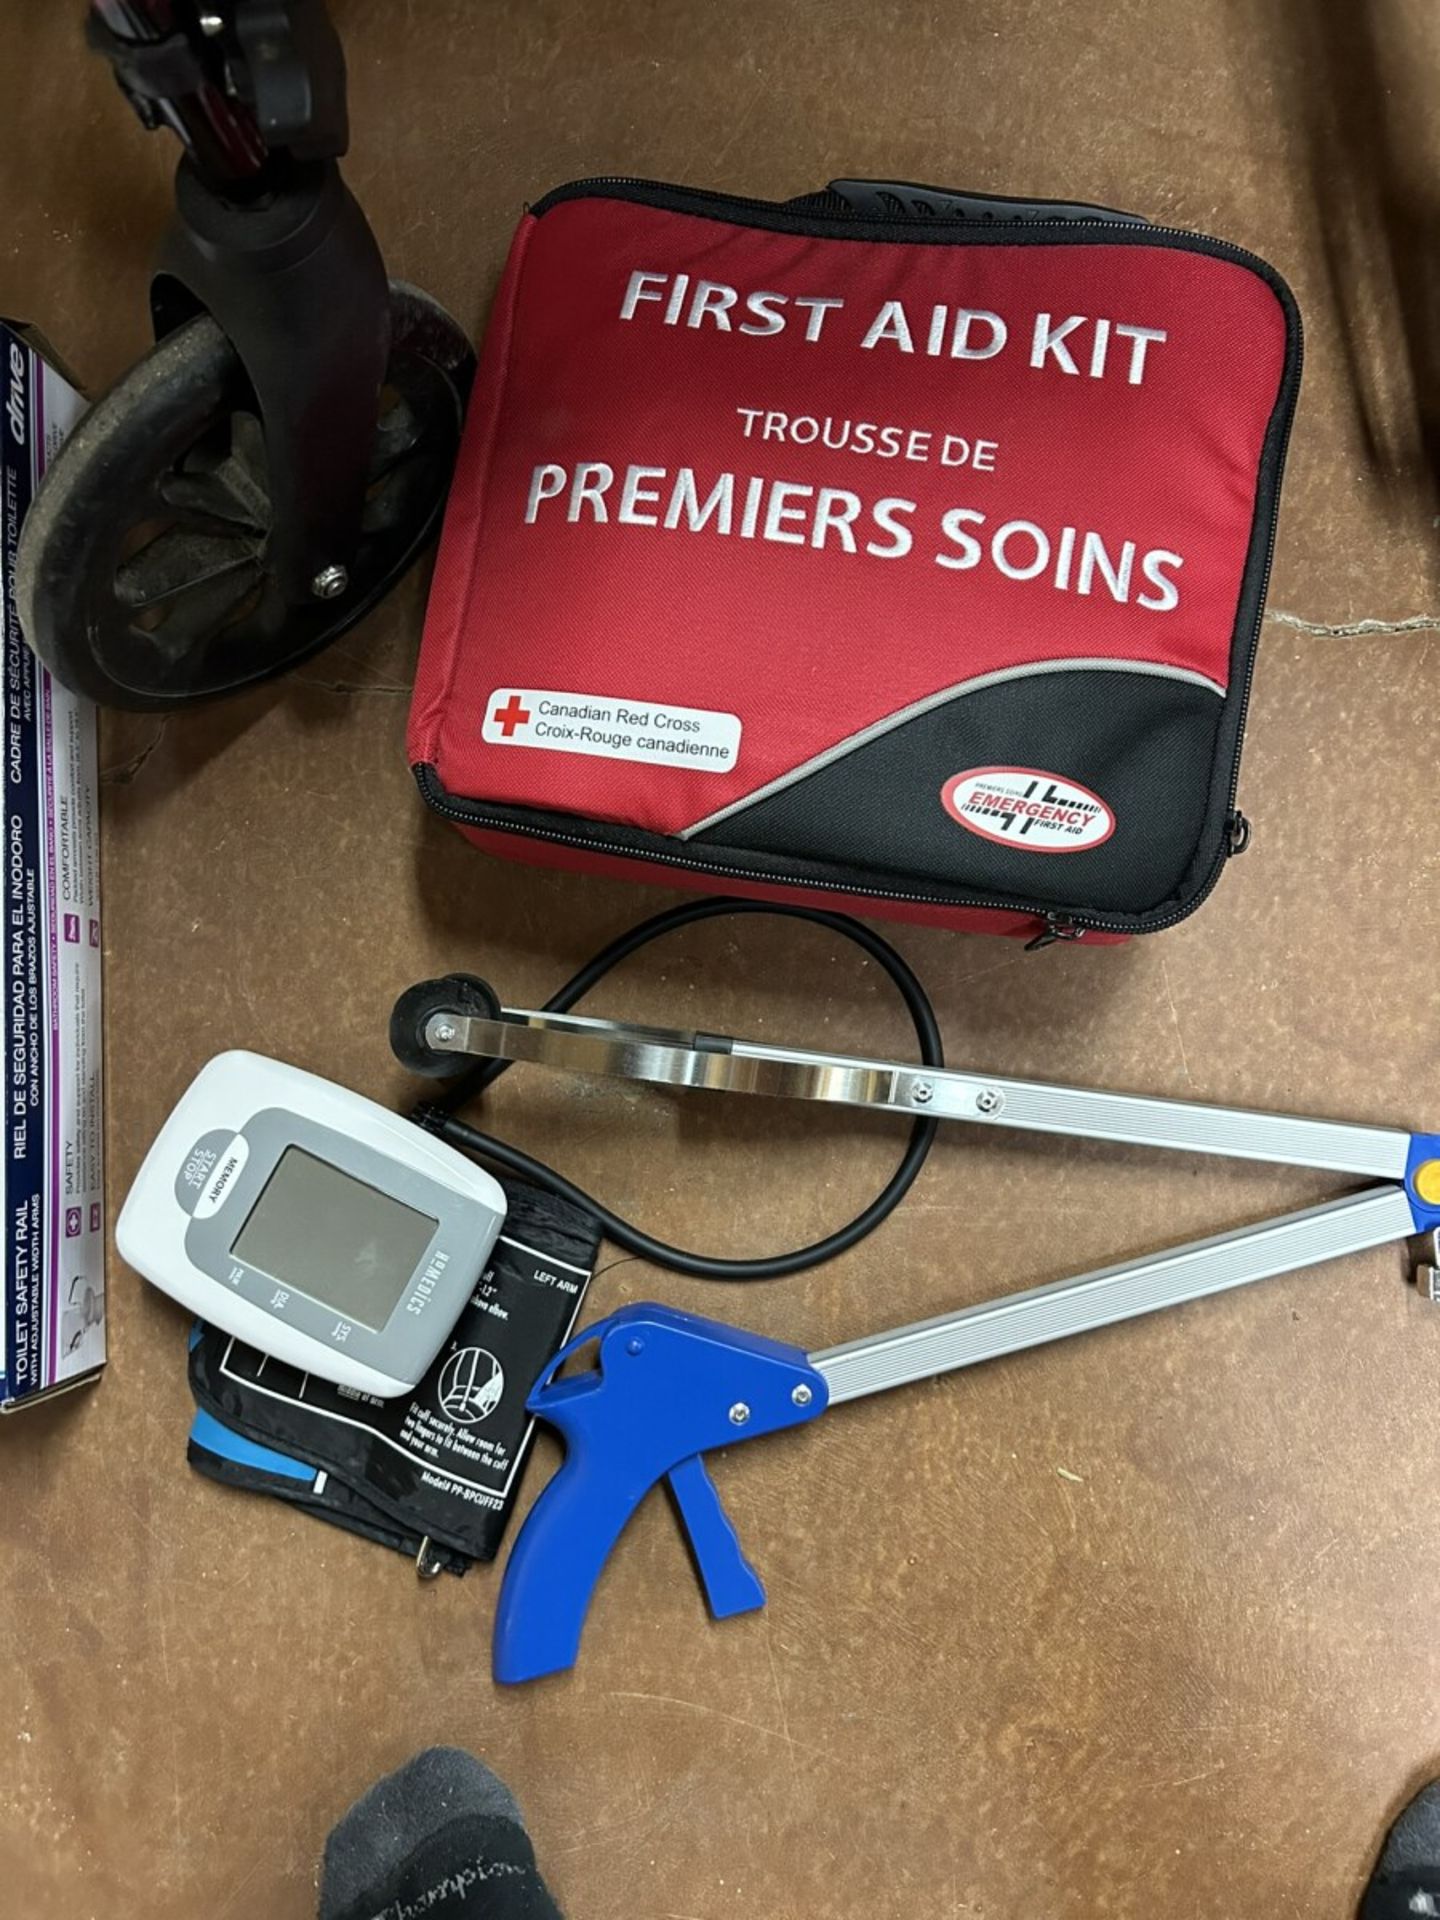 WHEEL CHAIR, BLOOD PRESSURE MONITOR, HAND CLAW, FIRST AID KIT, TOILET SAFETY RAIL - Image 3 of 6